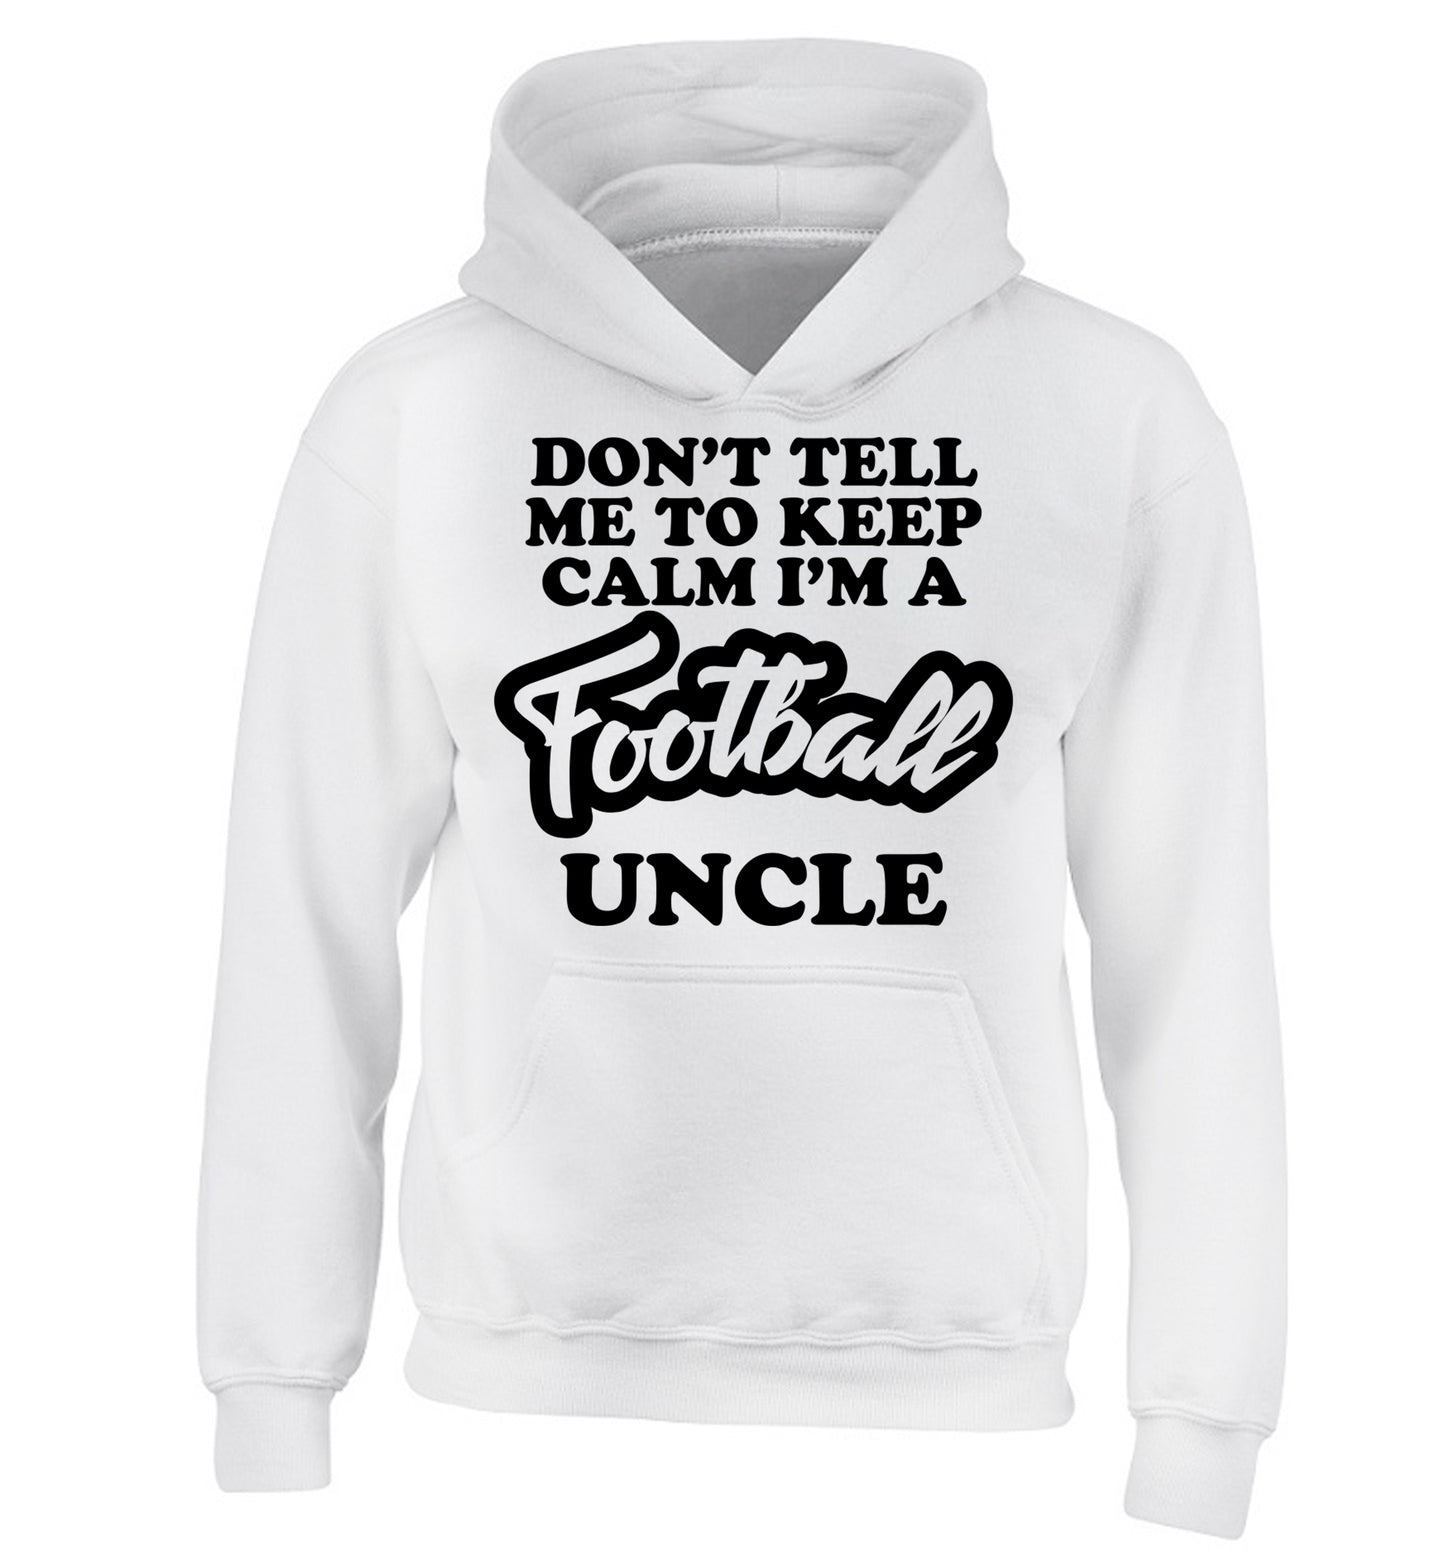 Worlds most amazing football uncle children's white hoodie 12-14 Years